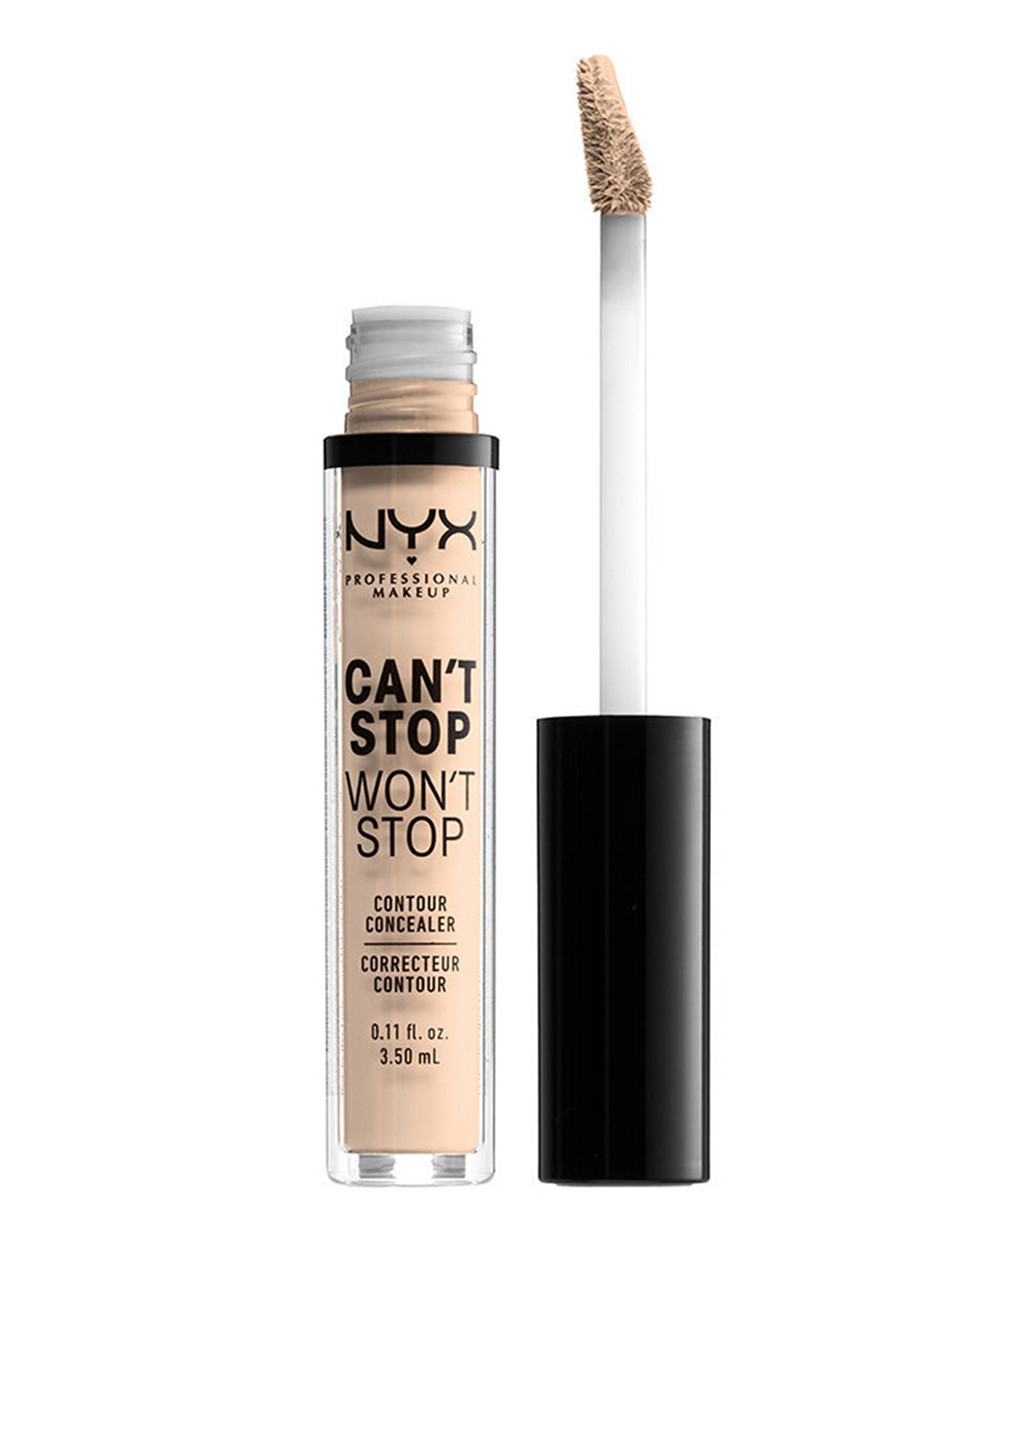 Консилер для лица Can't Stop Won't Stop Contour Concealer Light Ivory, 3,5 мл NYX Professional Makeup (202410692)